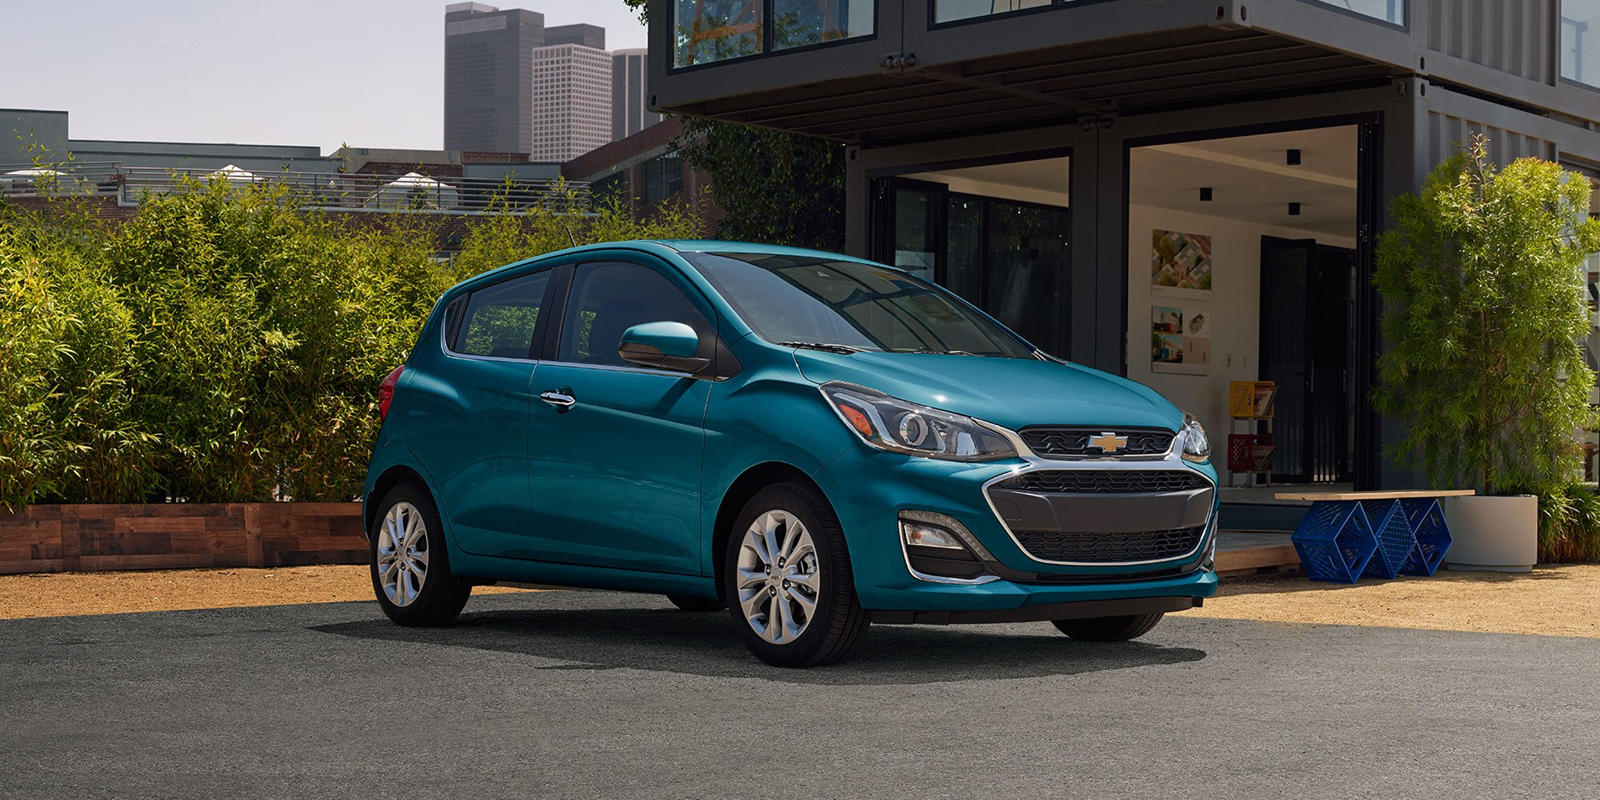 2022 Chevrolet Spark Front Angle View